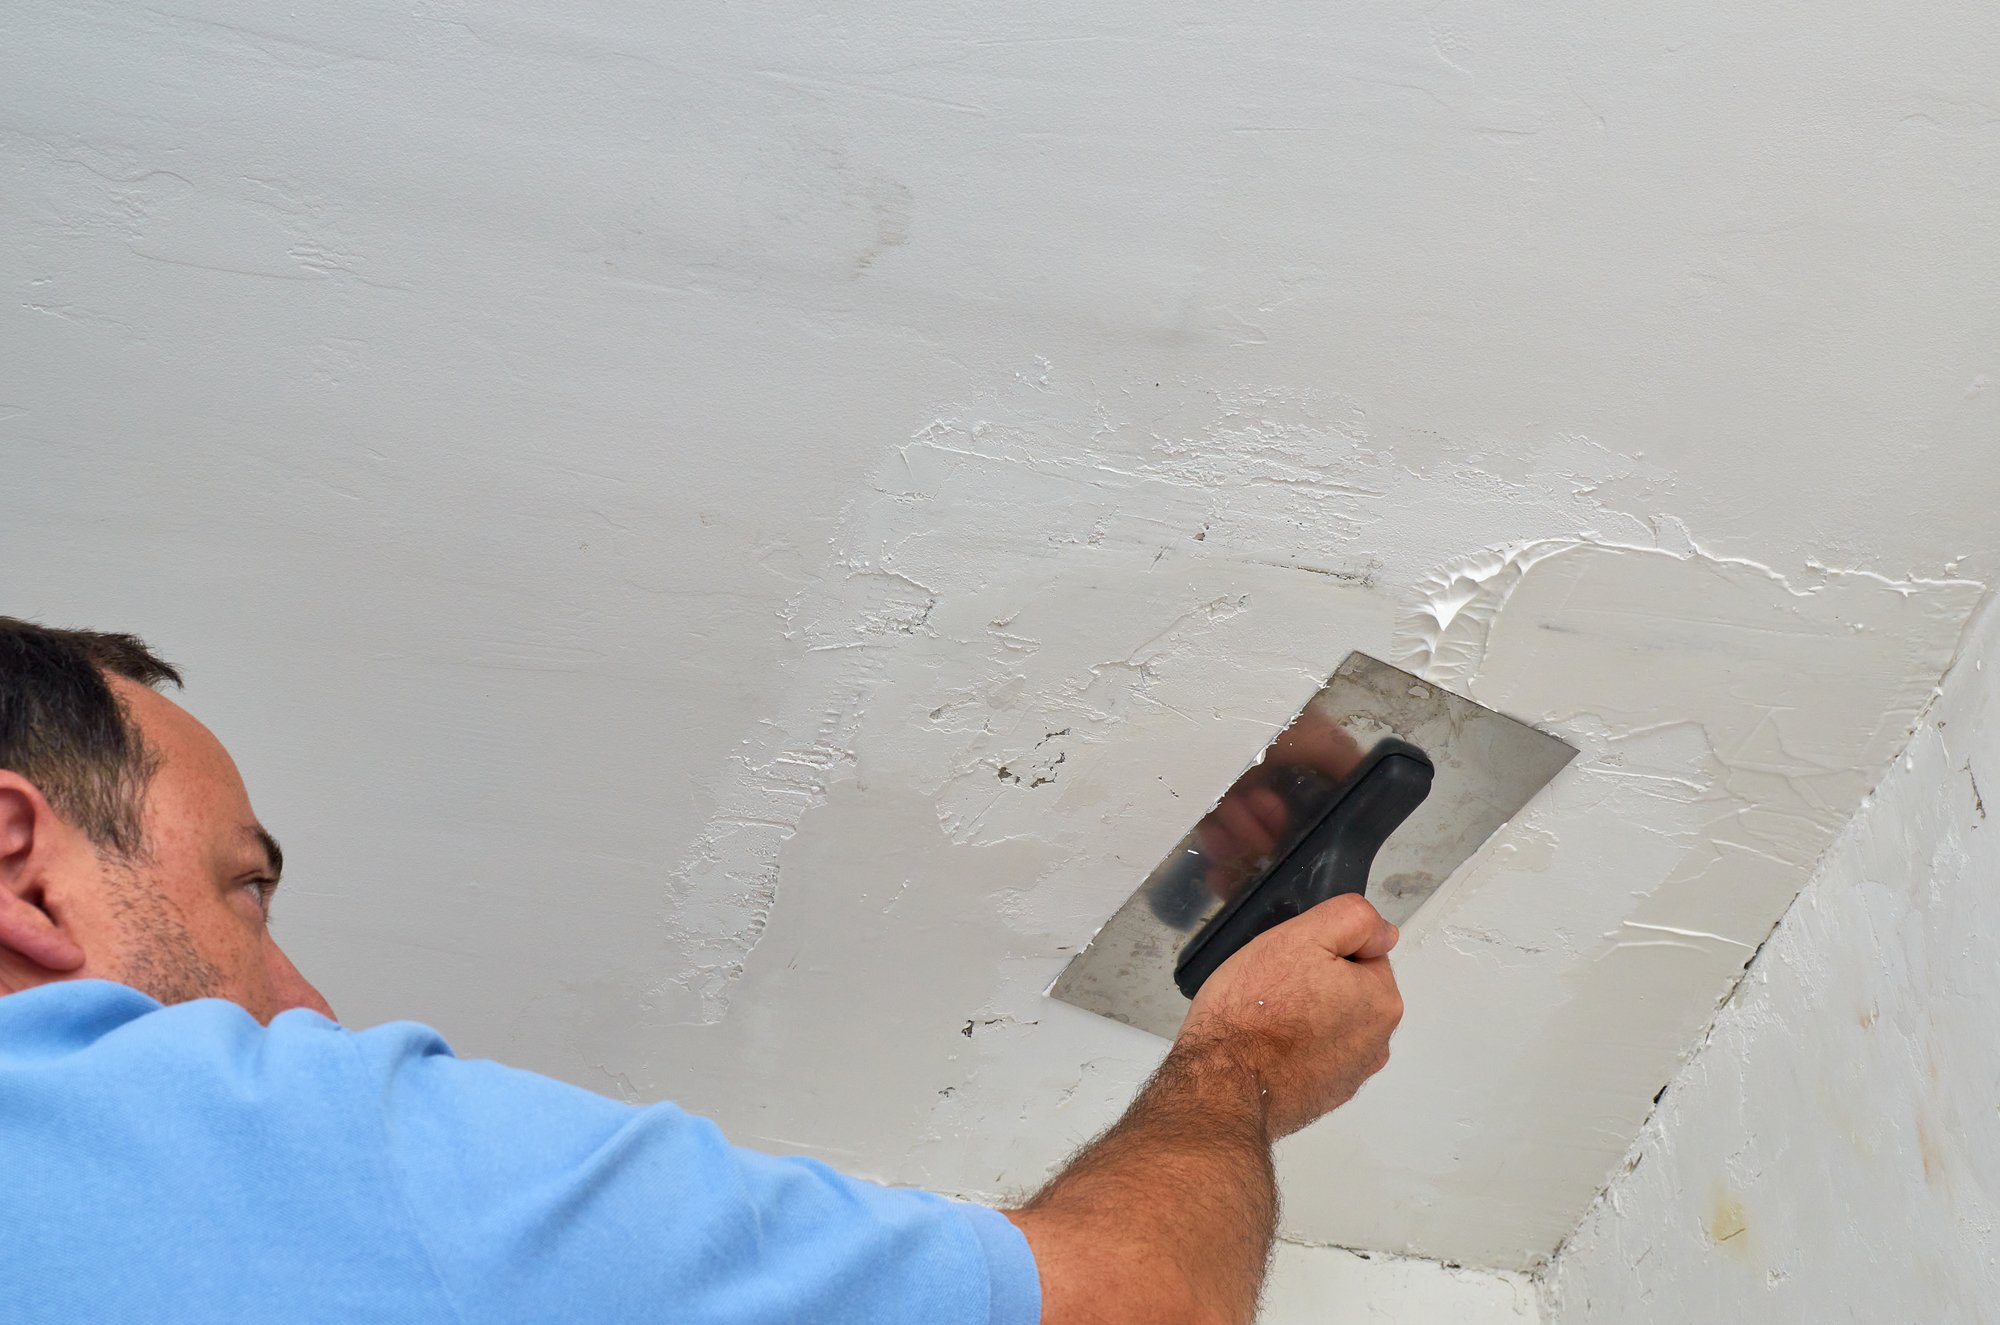 Man smoothing a ceiling with a trowel during renovating works